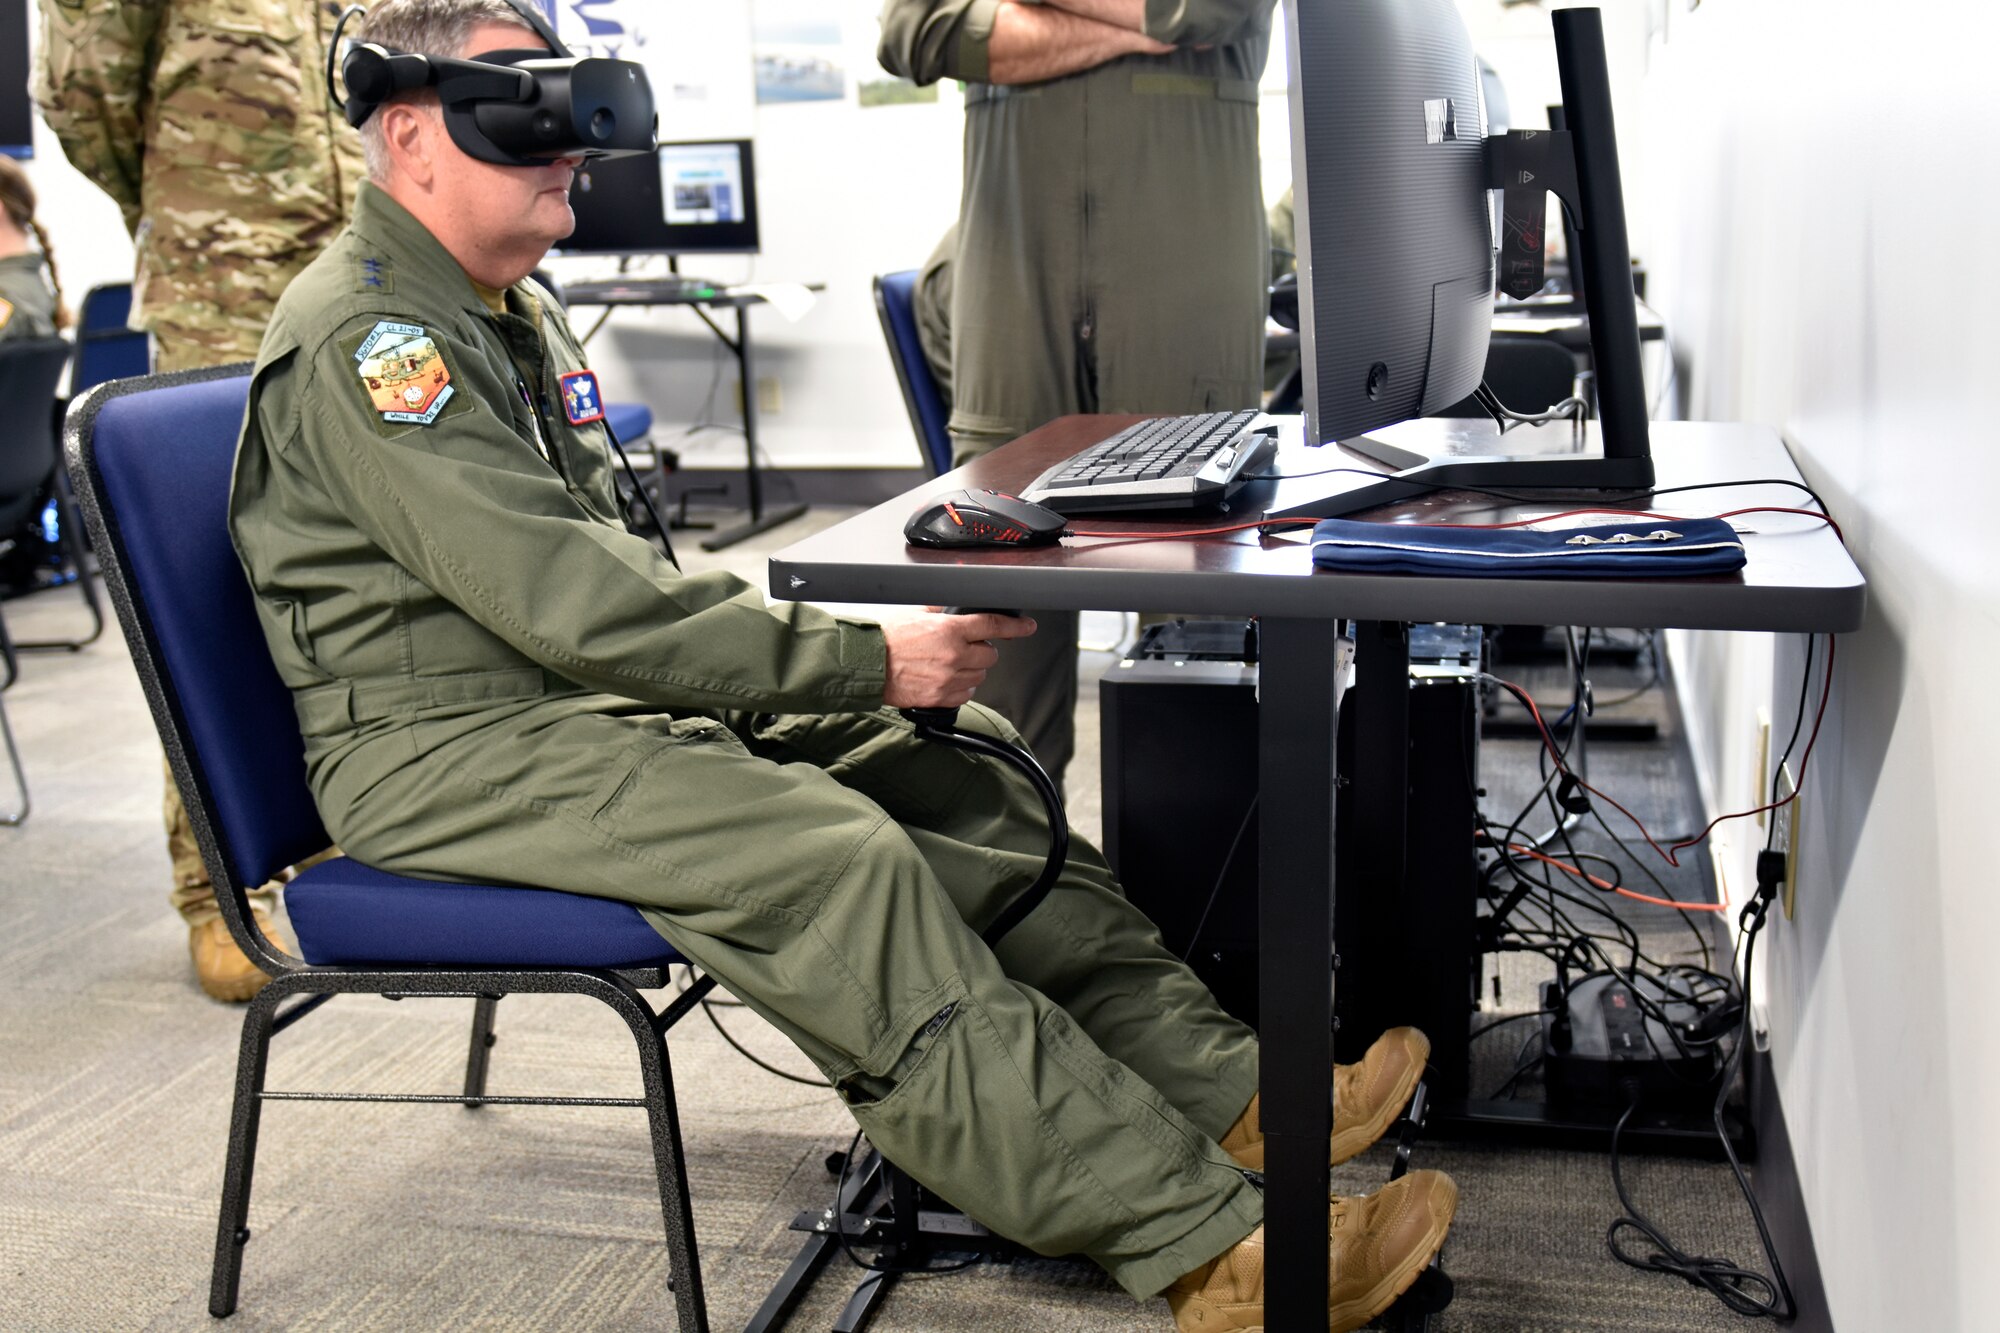 Lt. Gen. Brad Webb, commander of Air Education and Training Command, and Lt. Col. Joseph Davis, 23rd Flying Training Squadron commander, take a closer look at a virtual reality simulator used in Helicopter Training Next. Webb visited the 23rd FTS and provided remarks during the HTN graduation June 22, 2021, at Fort Rucker, Alabama. HTN is one aspect of the AETC Pilot Training Transformation efforts that include Undergraduate Pilot Training 2.5, Accelerated Path to Wings, Remote SIM Instruction, Civil Path to Wings and Alternate Path to Wings.